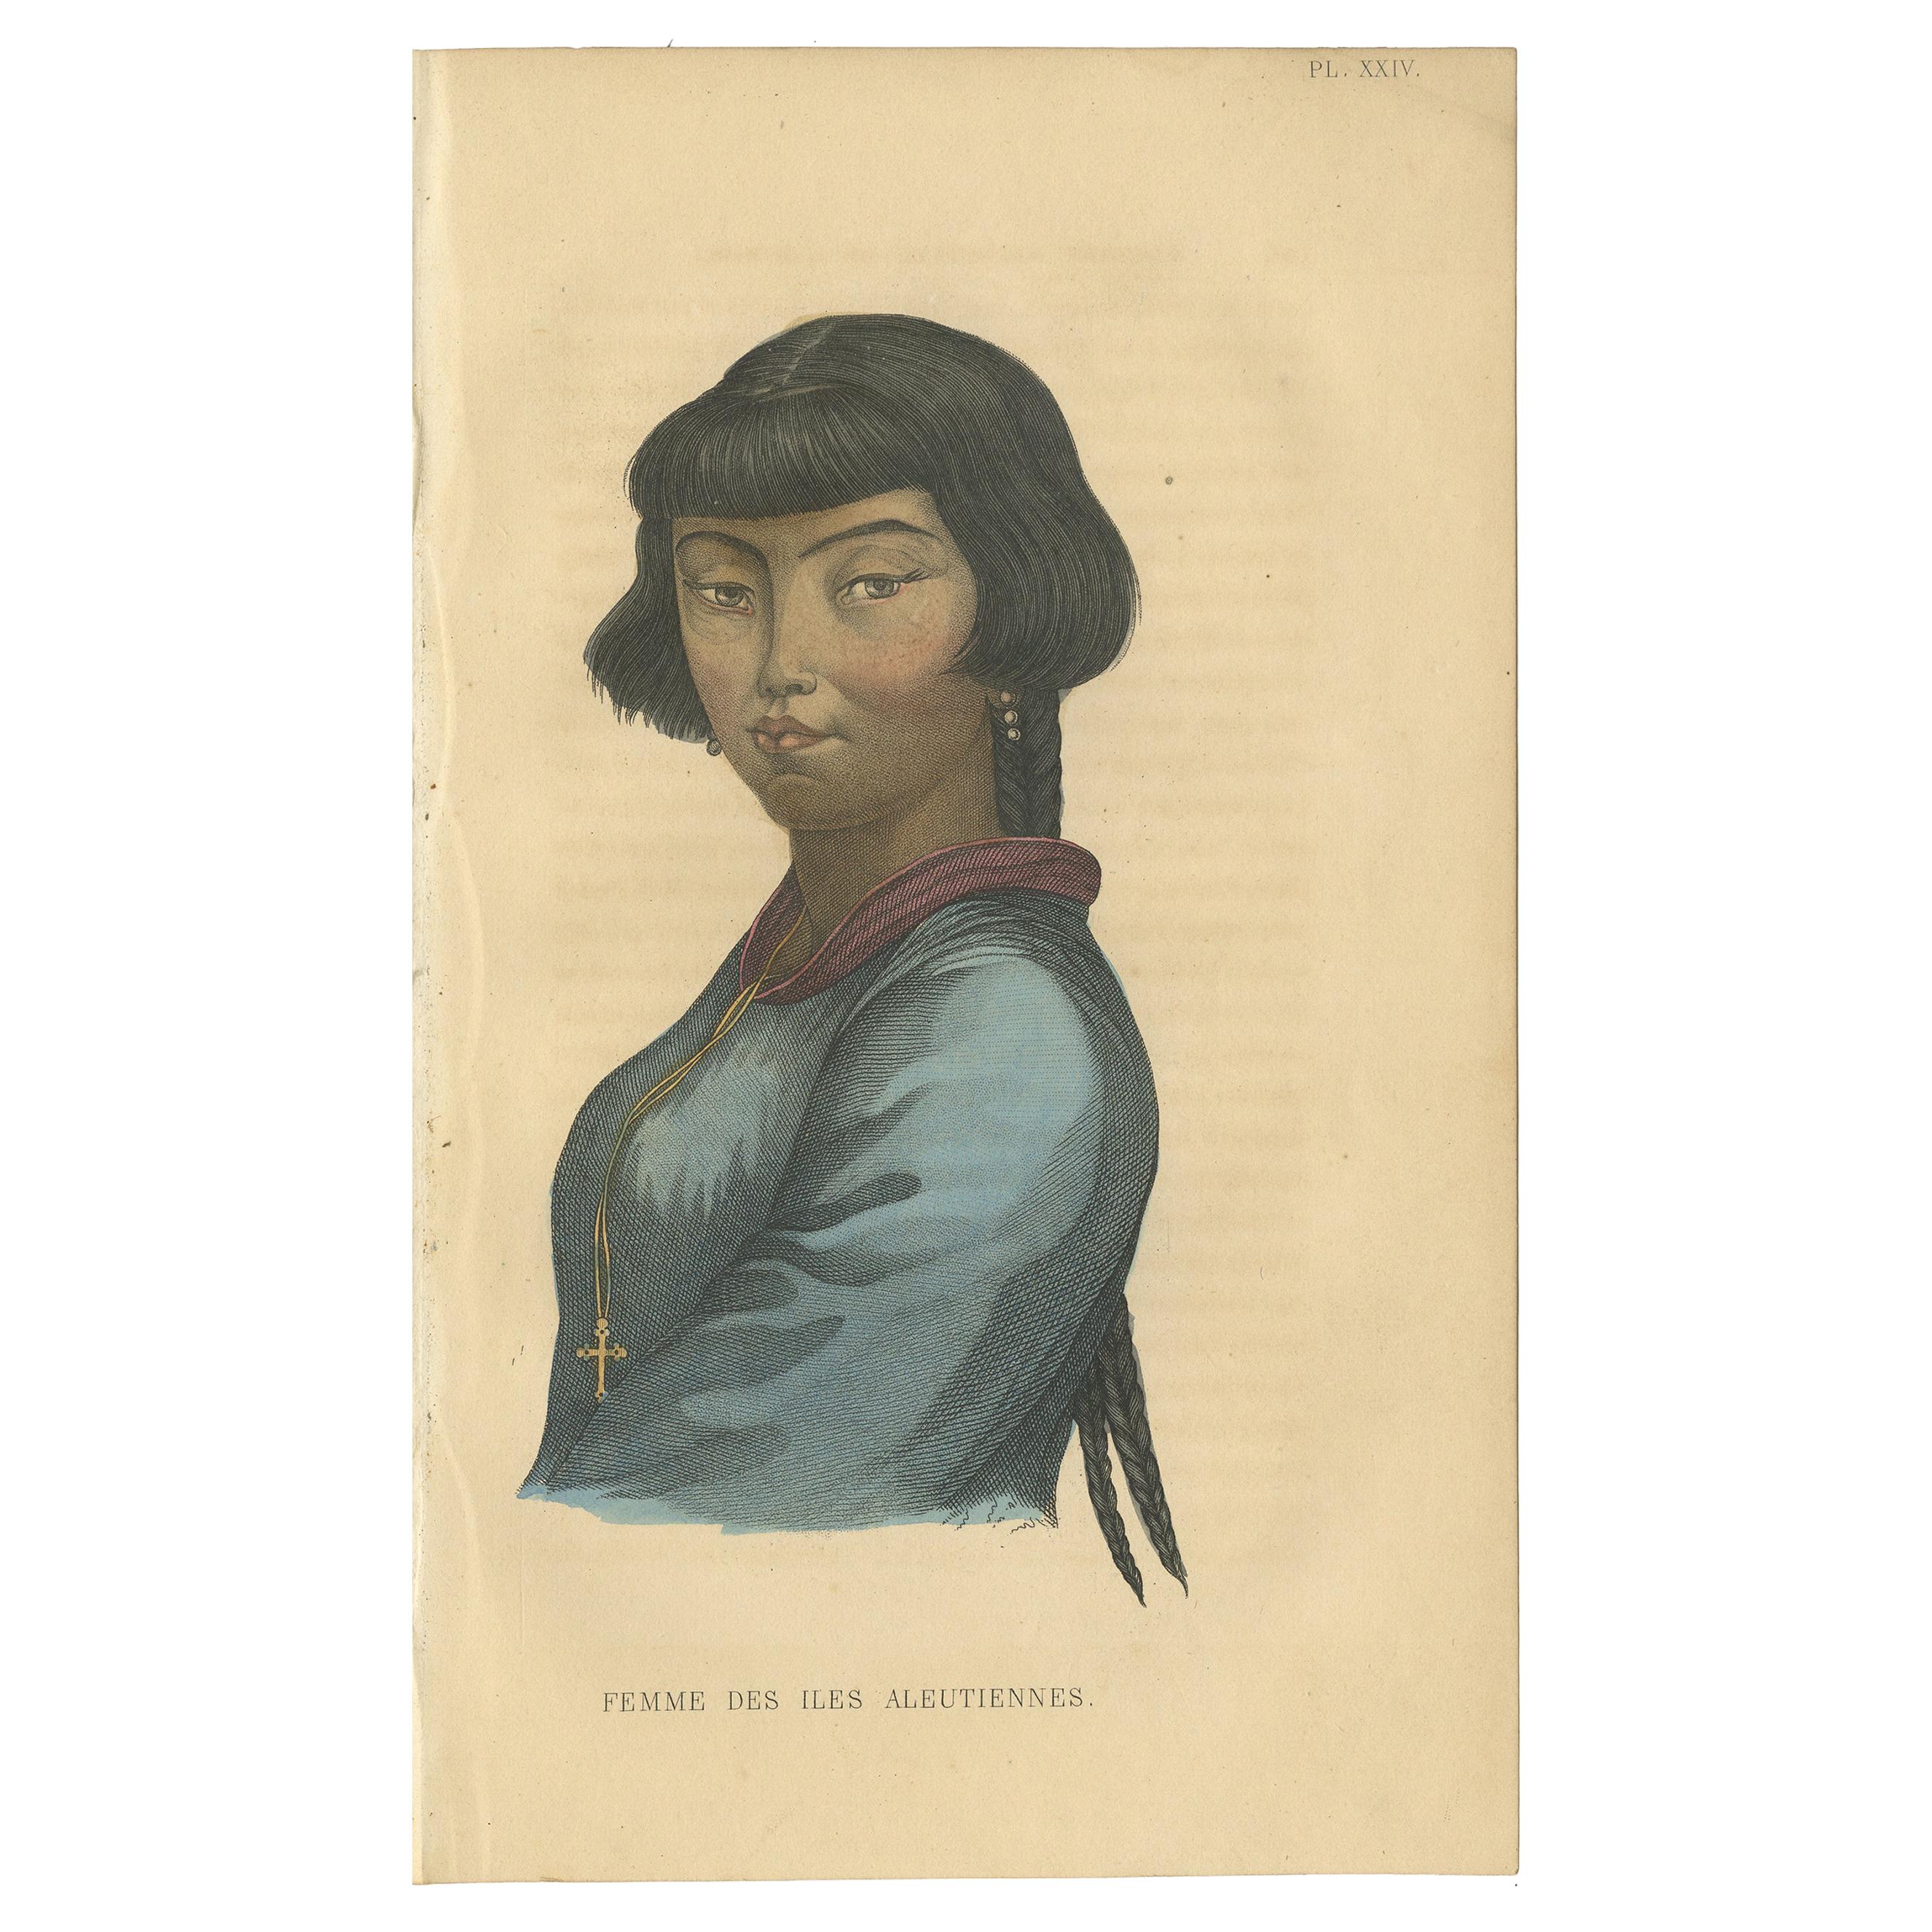 Antique Print of a Female of the Aleutian Islands by Prichard, 1843 For Sale